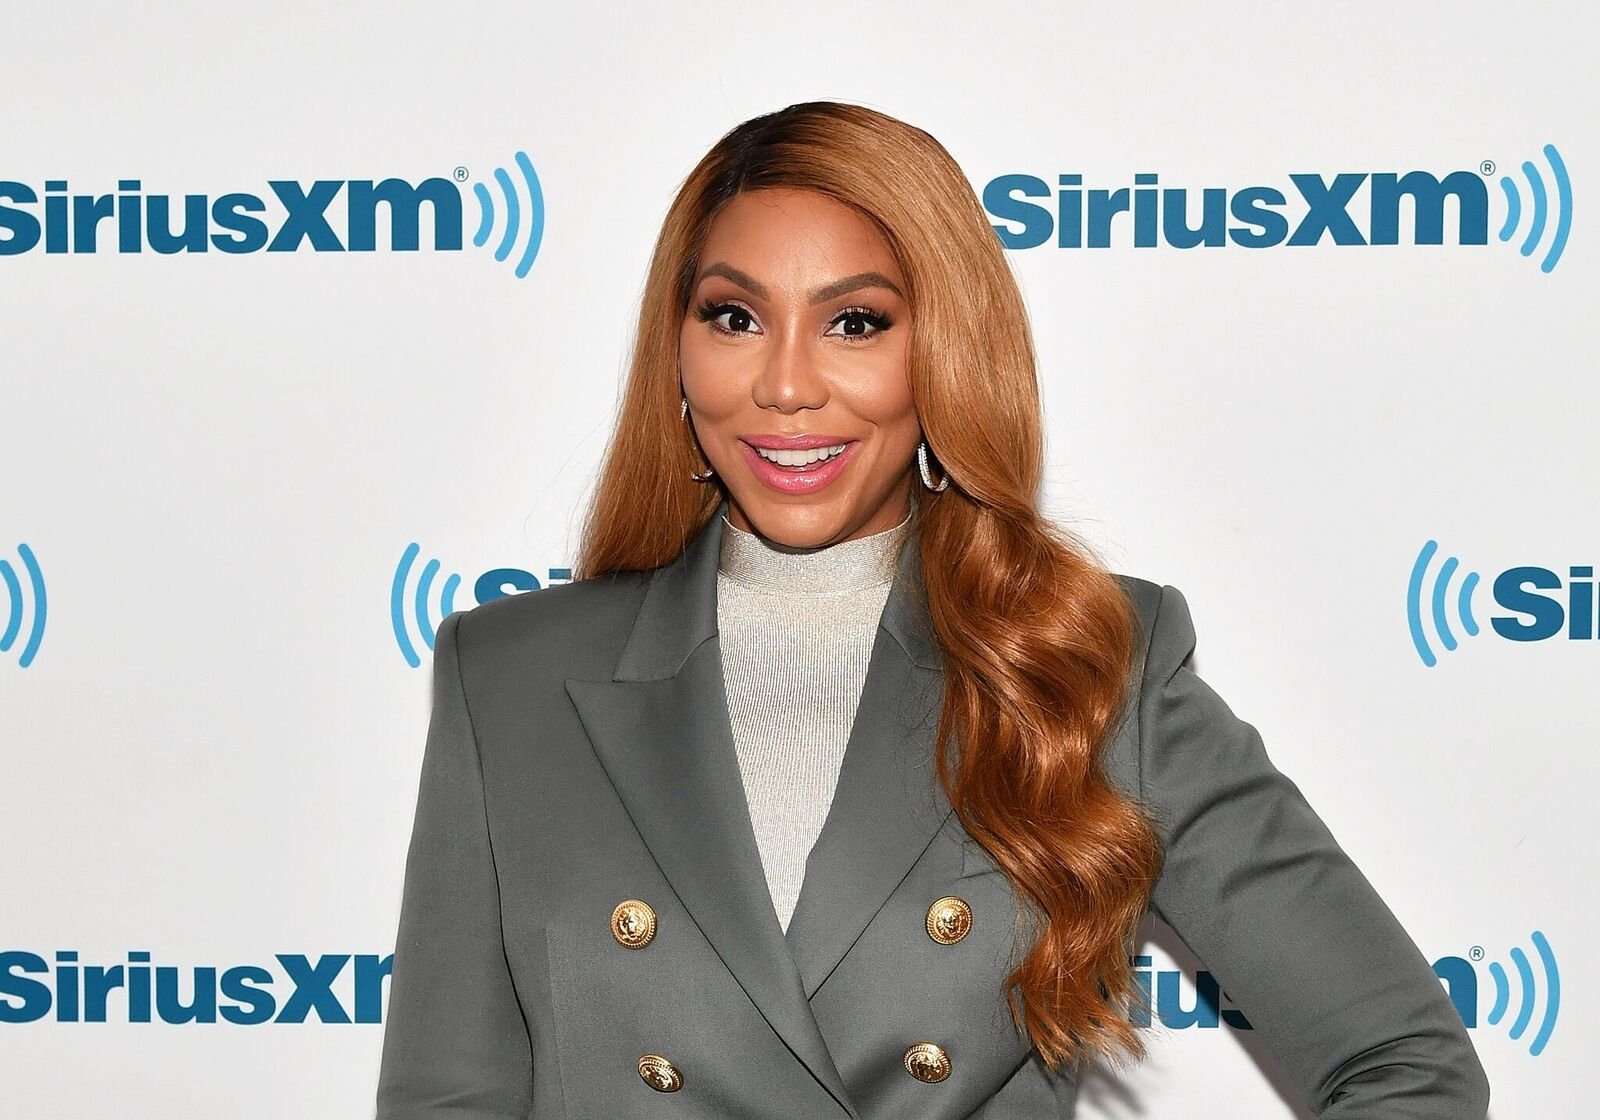 Singer/TV personality Tamar Braxton celebrates her birthday and Saint Patrick's Day at SiriusXM Studios on March 17, 2017 | Photo: Getty Images